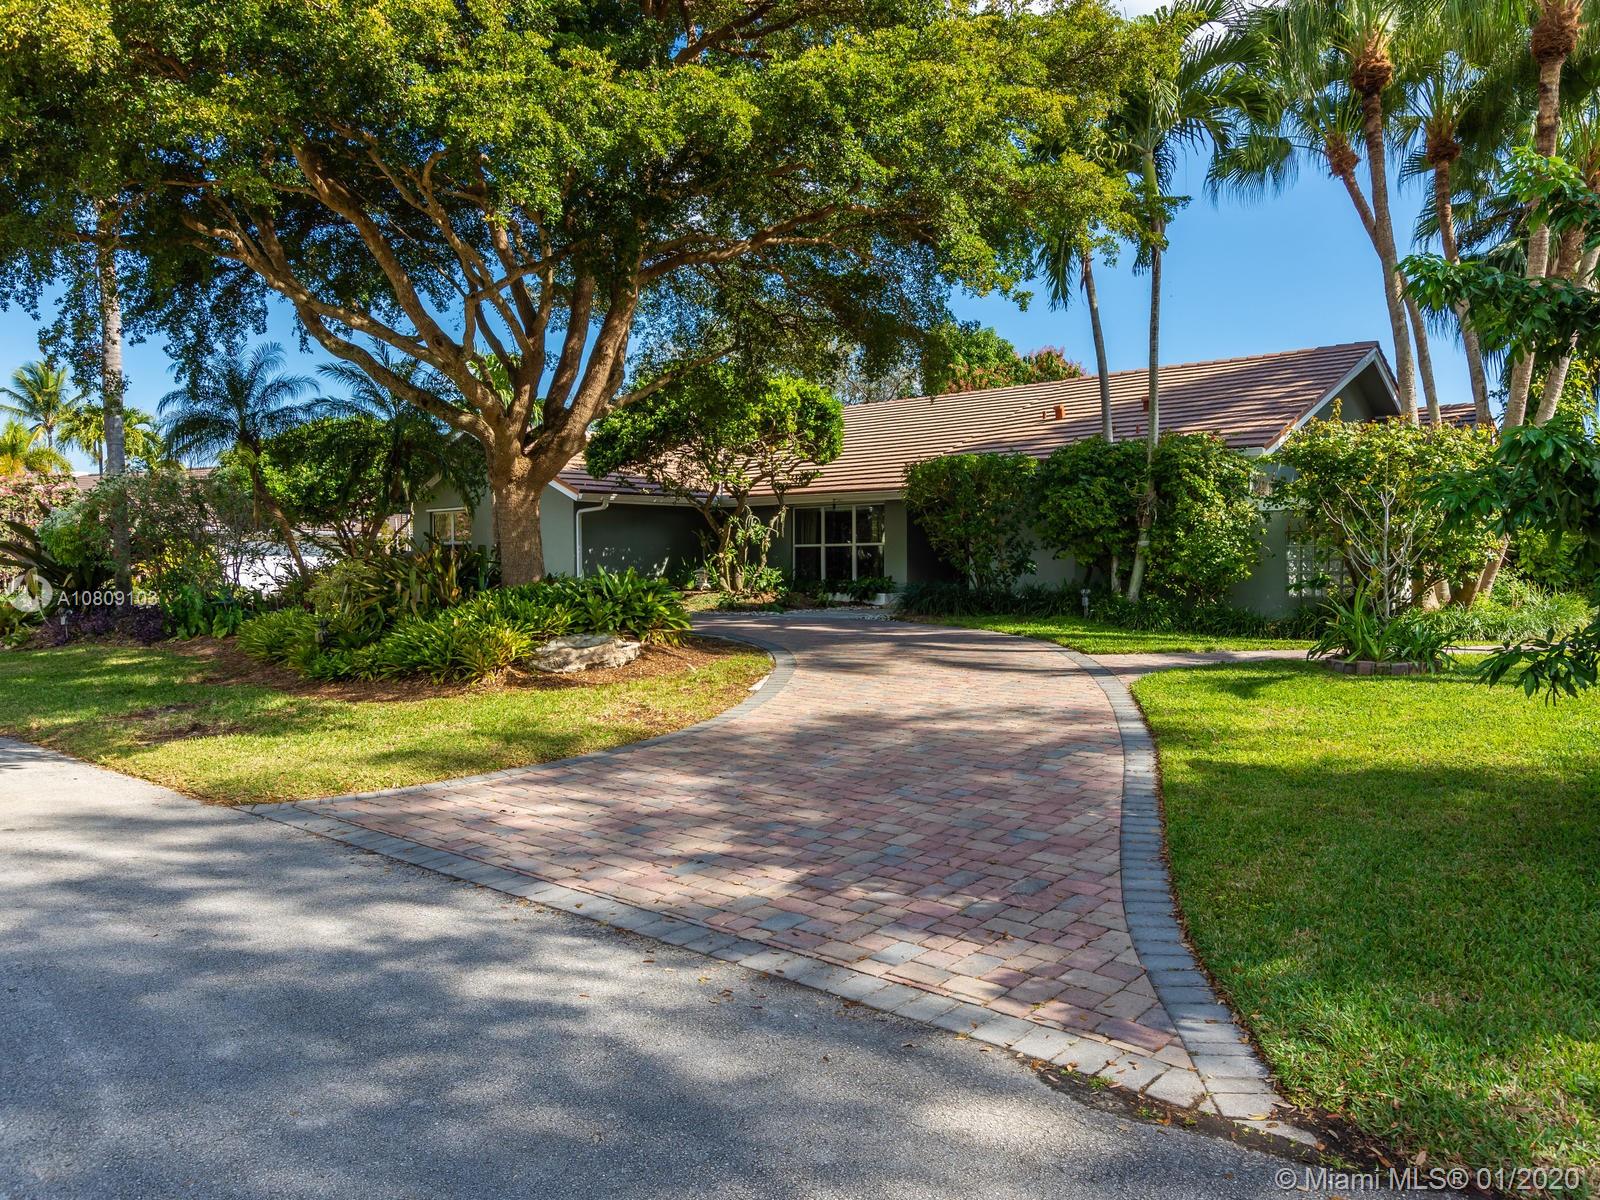 This address sits on a very low traffic street. It is quiet, and surrounded by beautiful Miami nature.